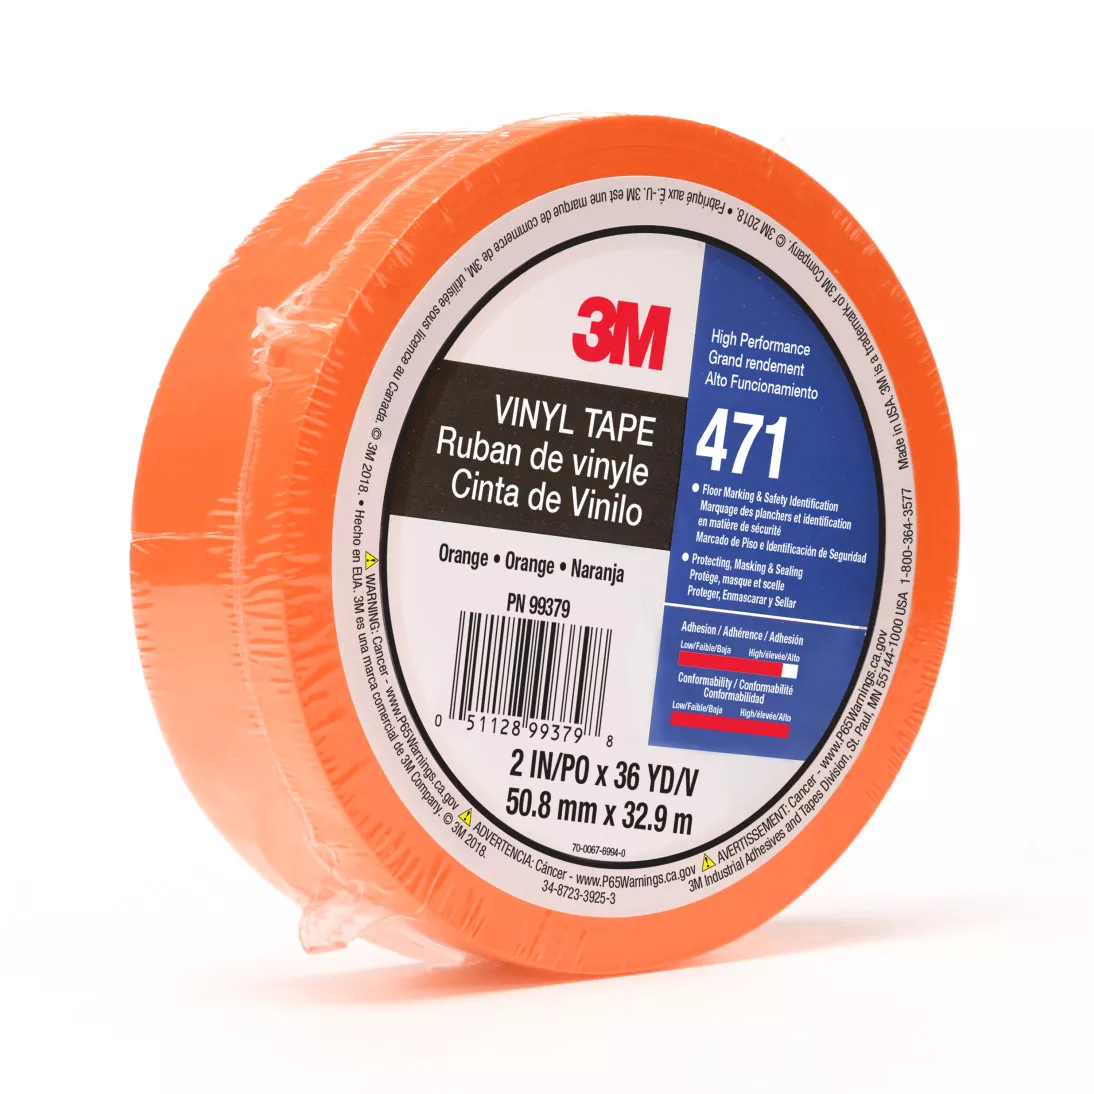 3M™ Vinyl Tape 471, Orange, 2 in x 36 yd, 5.2 mil, 24 rolls per case,
Individually Wrapped Conveniently Packaged